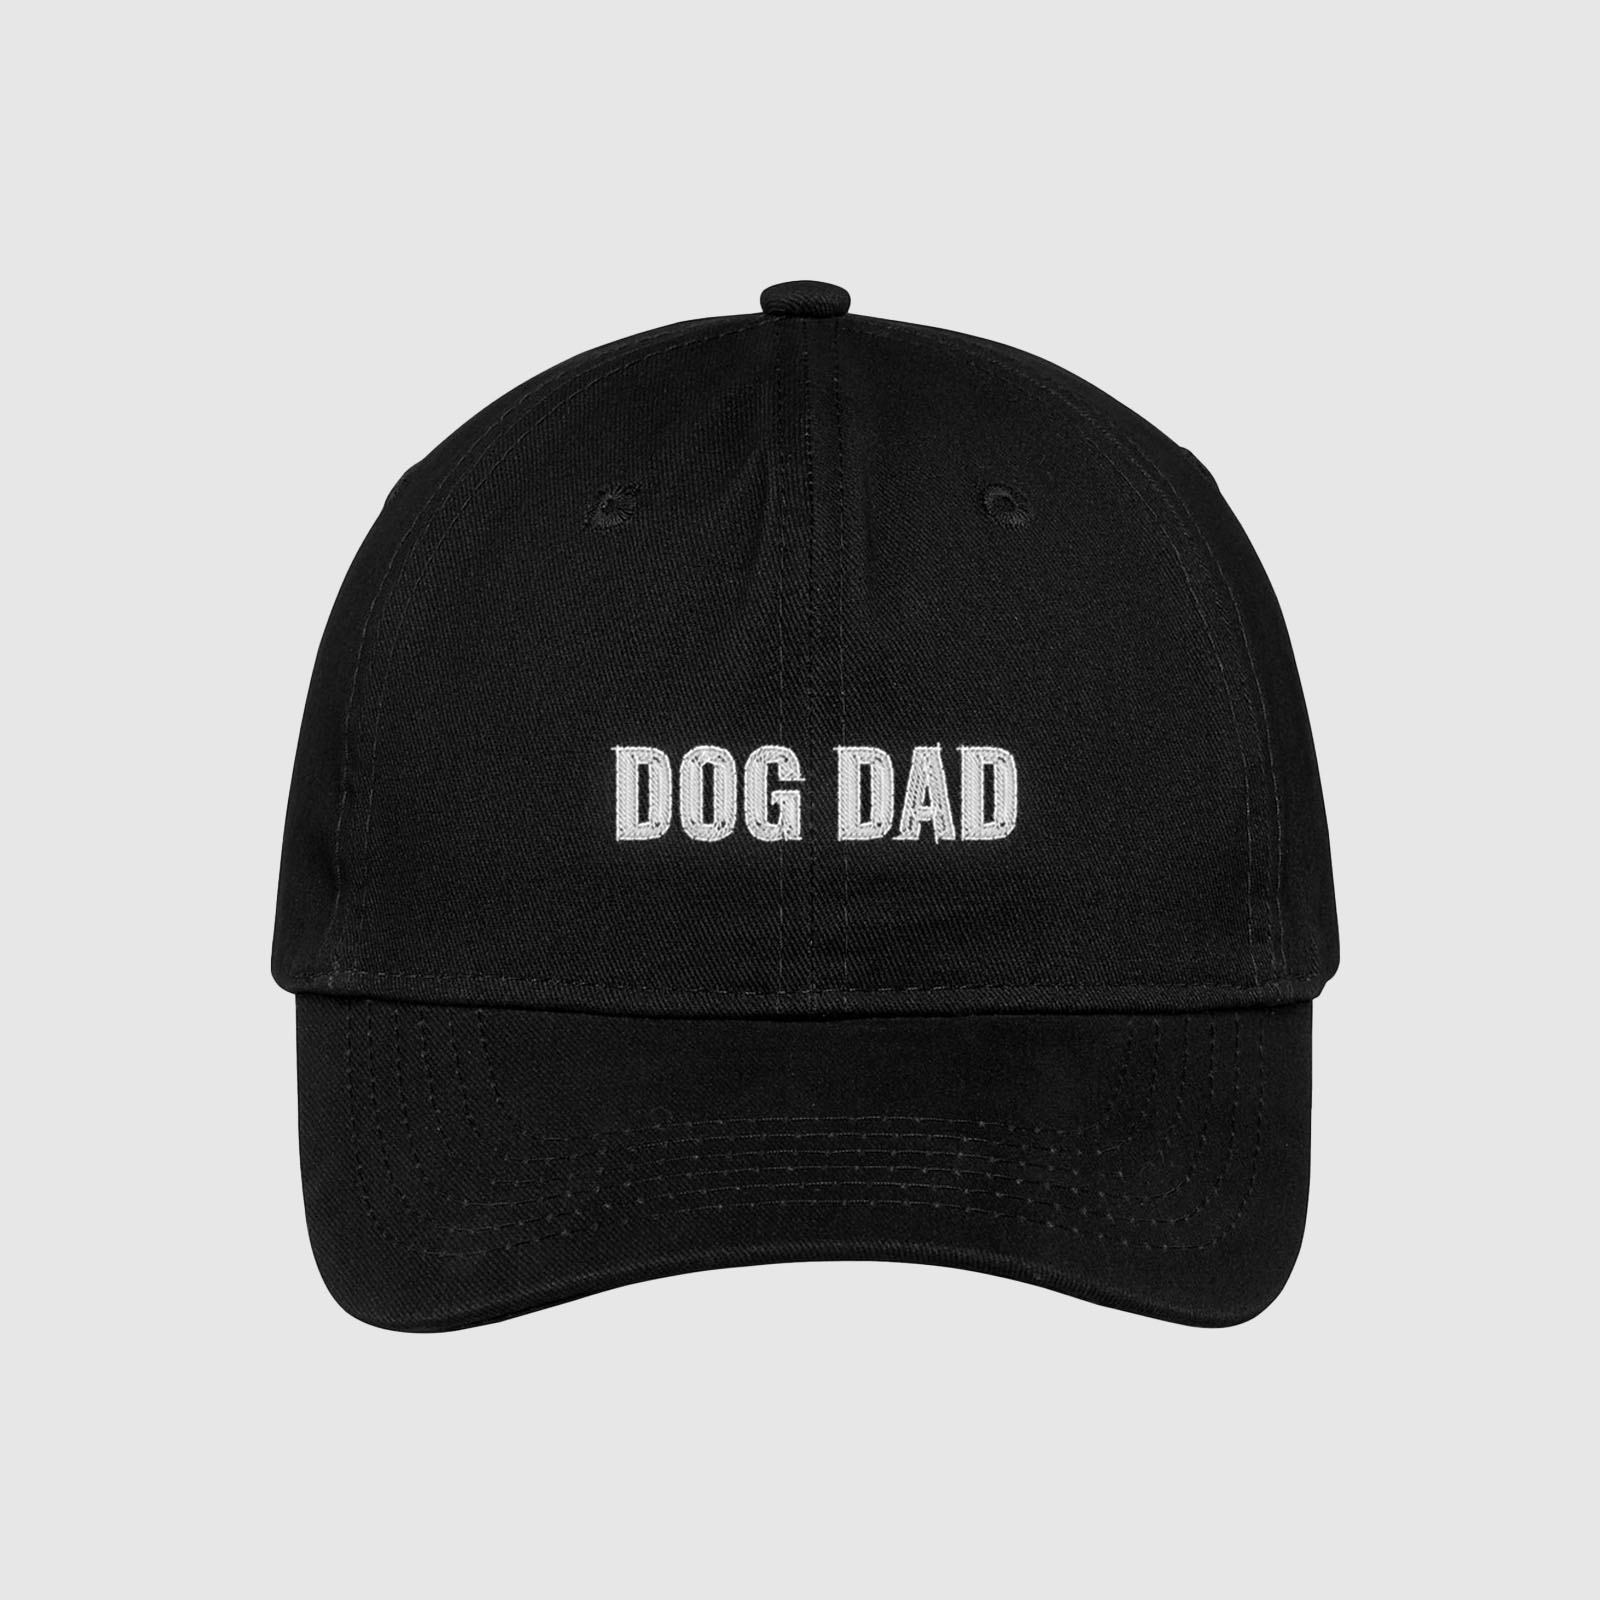 Black Dog Dad Hat embroidered with white text